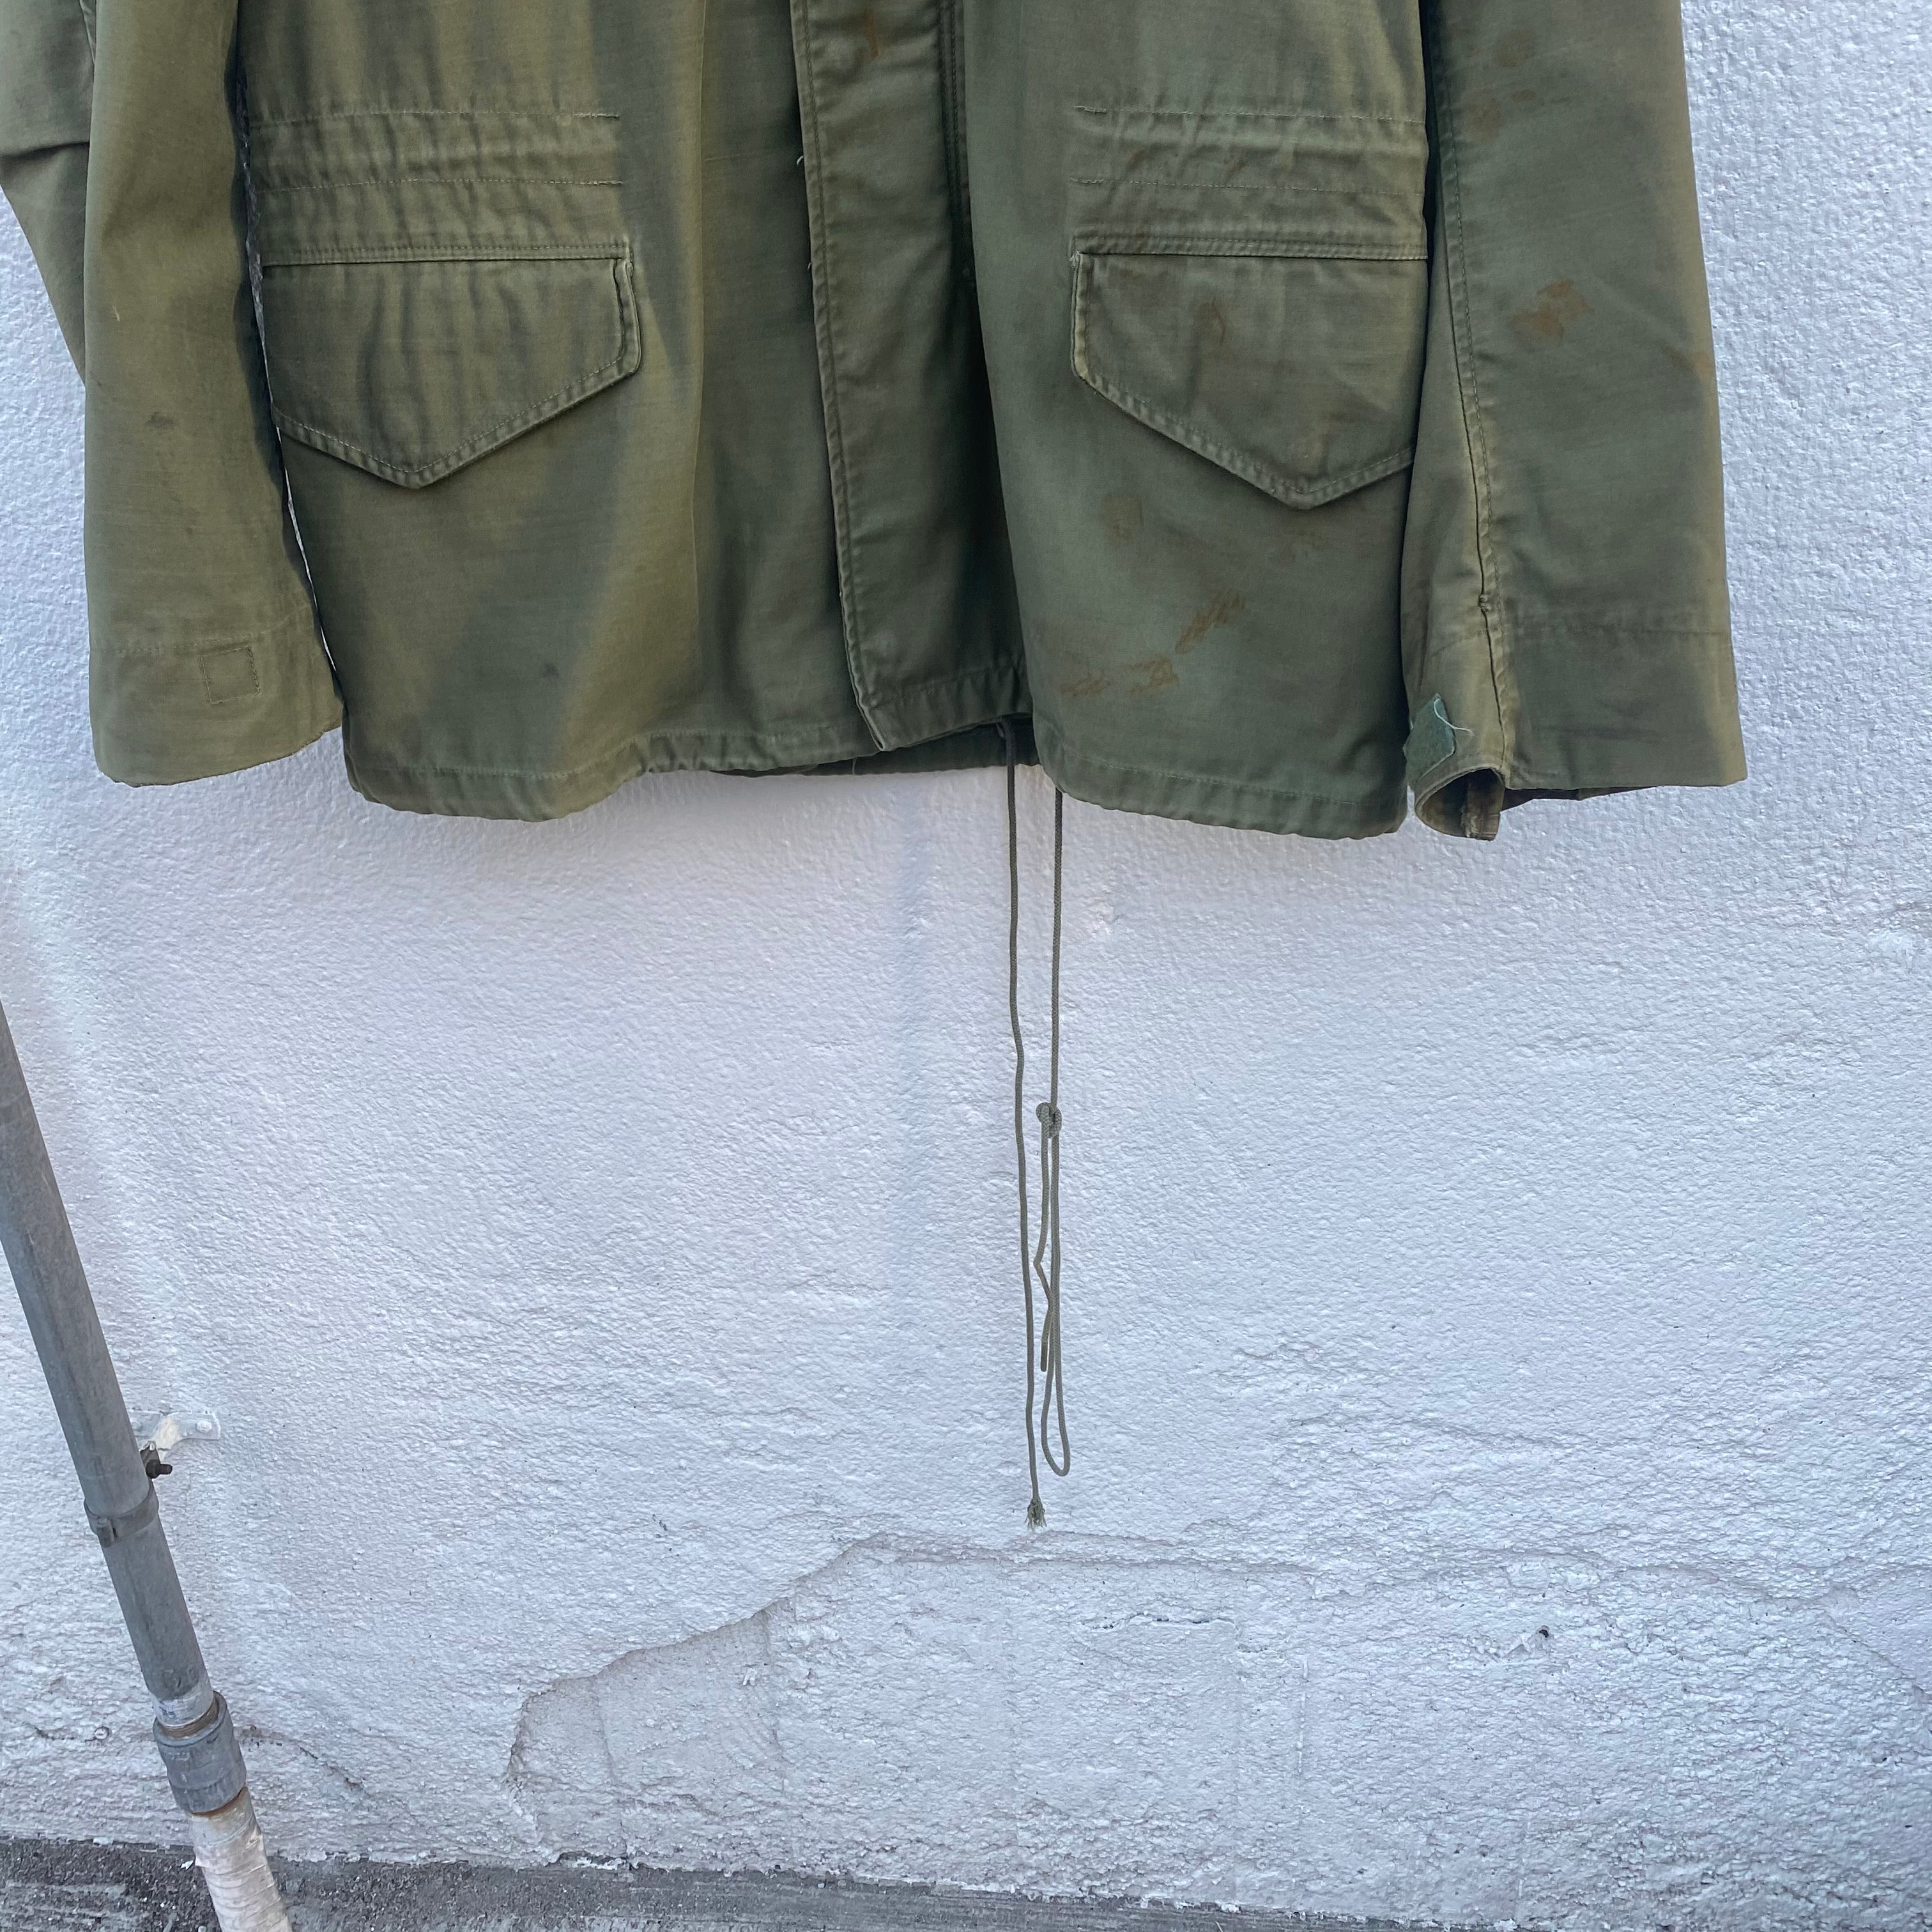 [ ONLY ONE ! ] US ARMED FORCES M-65 Field COAT -1st Model-  / Mr.Clean Select